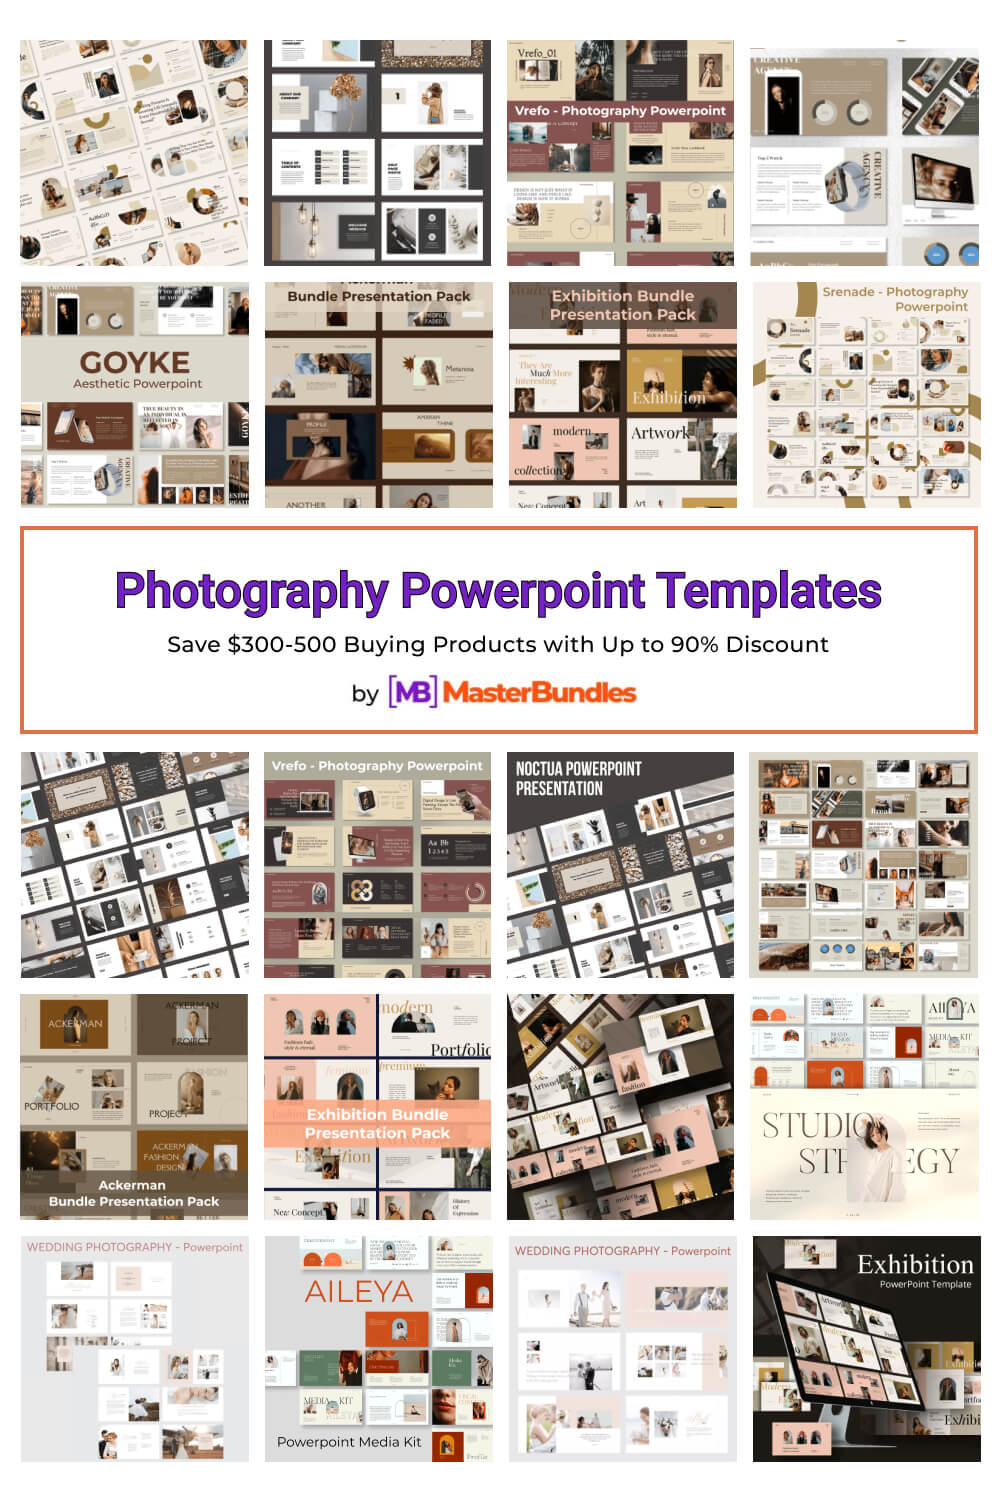 photography powerpoint templates pinterest image.